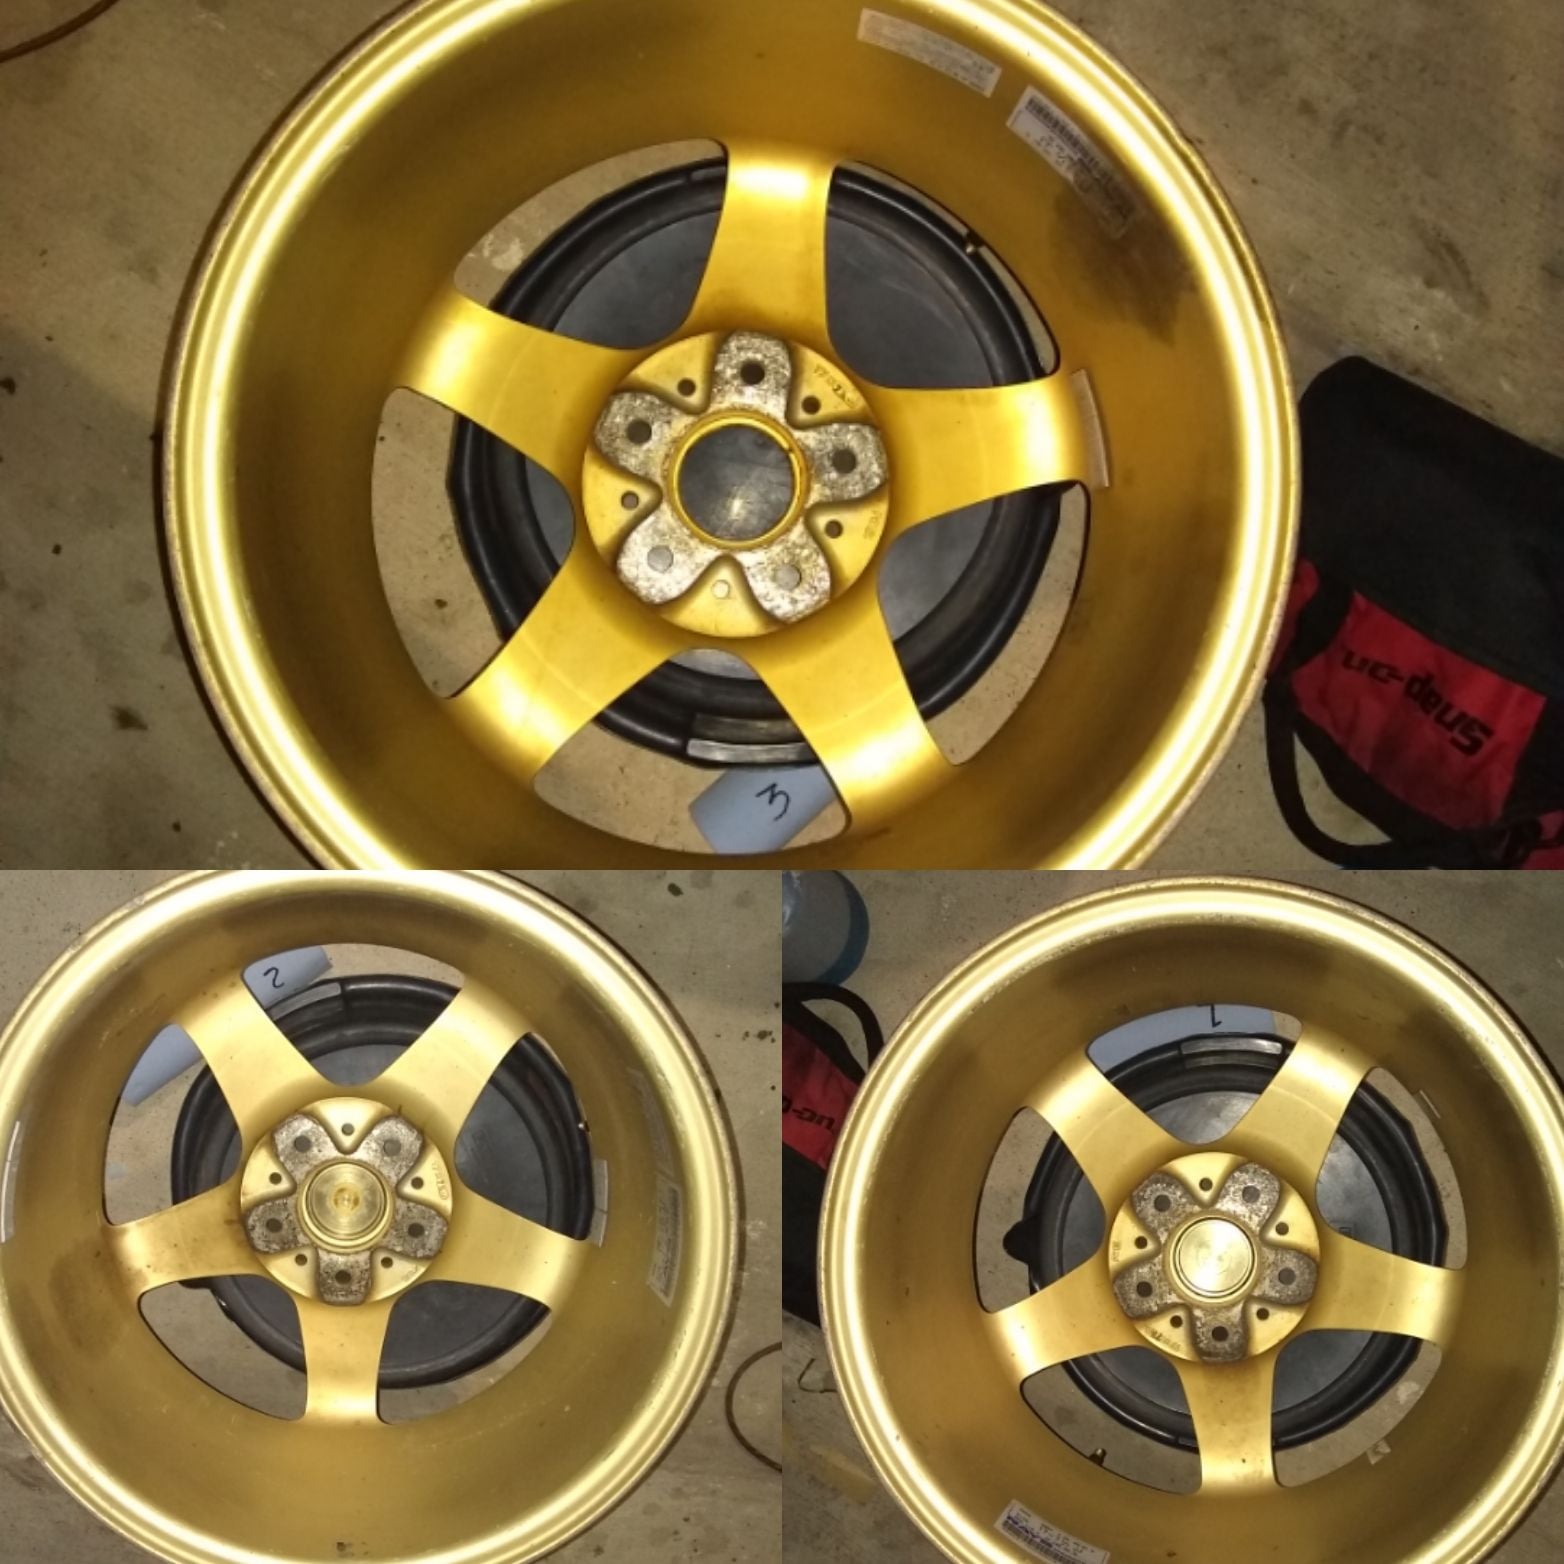 Wheels and Tires/Axles - FS: 3 Mazdaspeed MS01S wheels - Used - 0  All Models - Dallas, TX 75252, United States